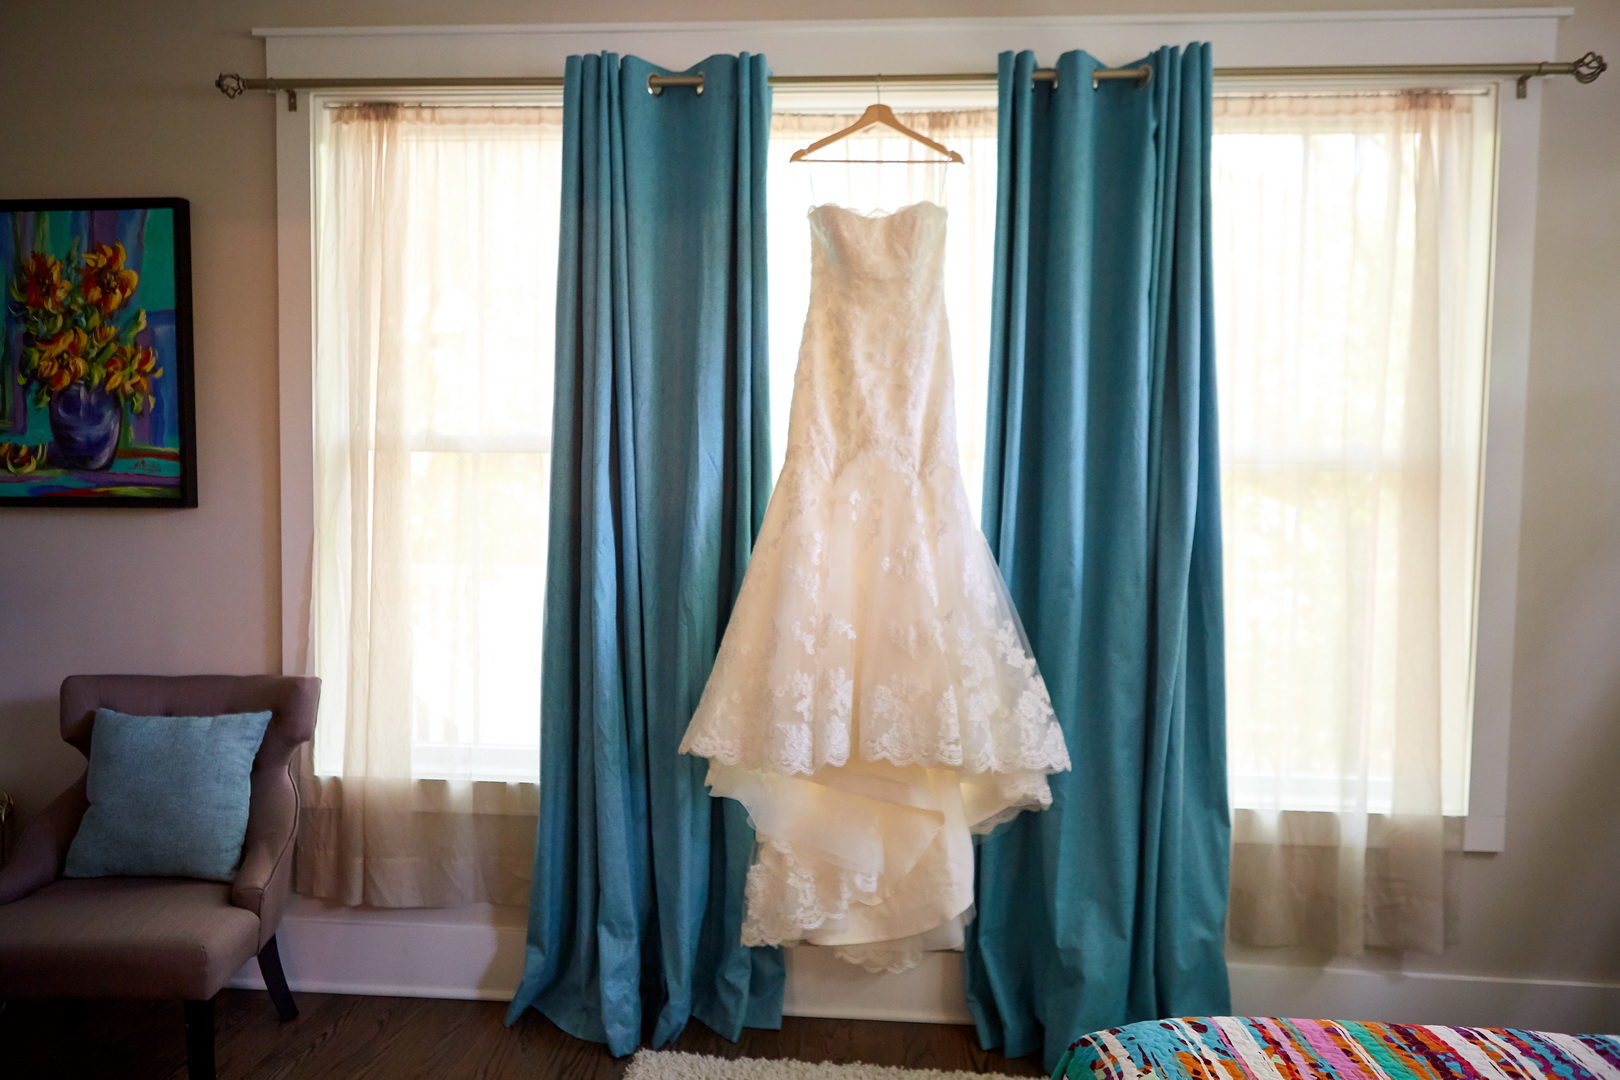 Lace wedding dress hanging in bedroom window of Isle of Palms, SC home